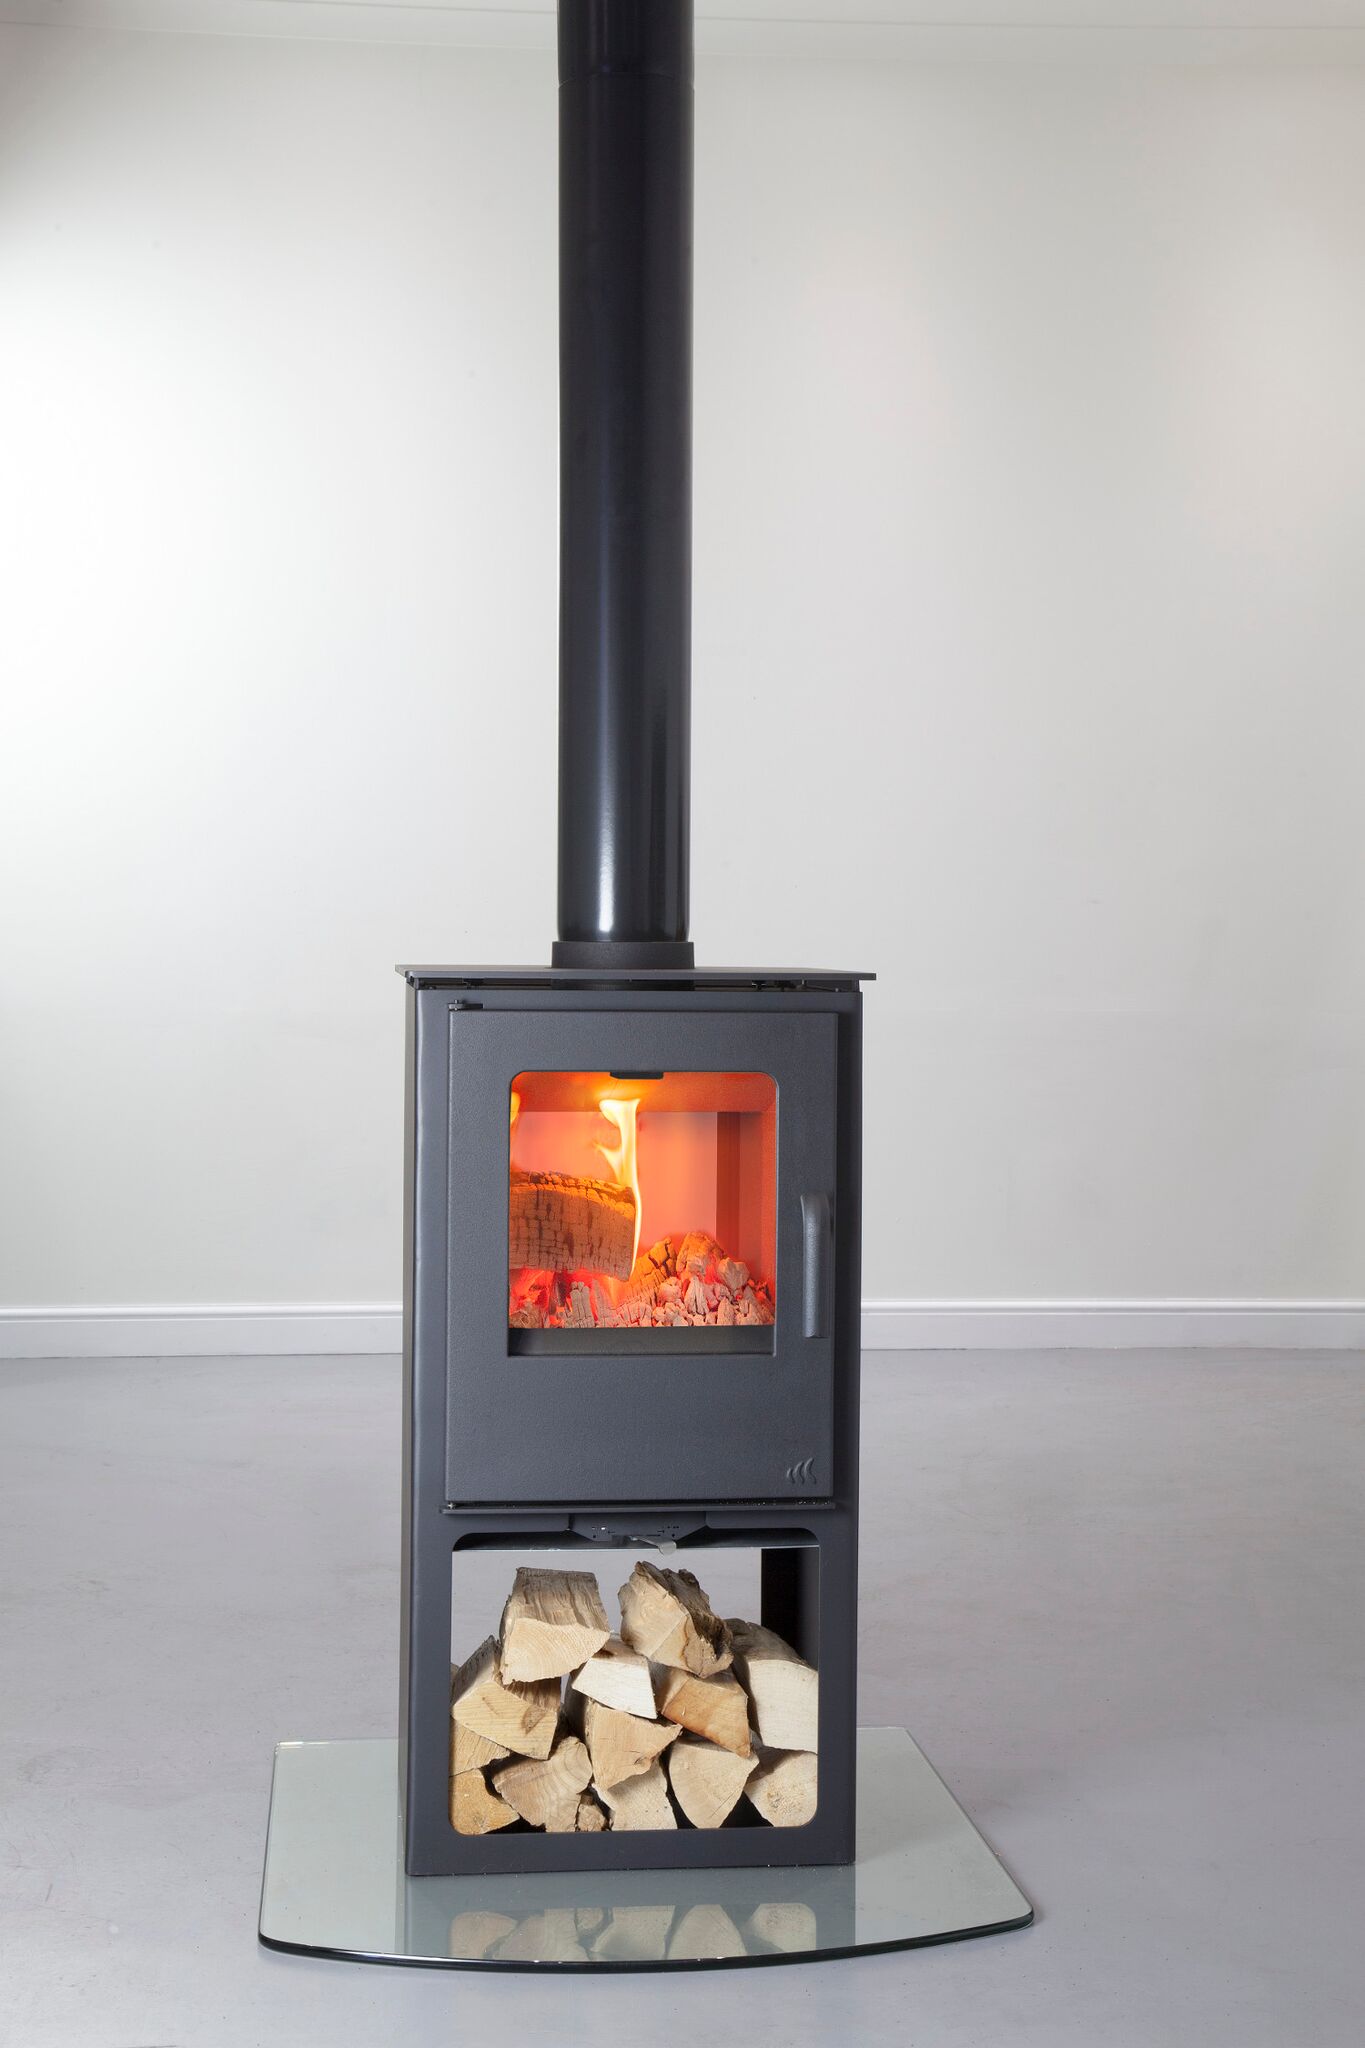 Loxton, freestanding, granite hearth, slate hearth, woodburning, multifuel, Bangor, Newtownards, Belfast, Holywood, Conlig, Stove yard, Fireplaces, flue pipe, hearths, room heater, wilsons, Portaferry, Kircubbin, Greyabbey, riven slate, wooden beans, fireplace beams, fire chambers, open fires, logs, coal, grates, stove glass, grate bars, ards fireplaces, Jubilee Road, Helensbay, Crawfordsburn, flexi flue, chimney cowls, down draught cowls, gas, natural gas, reflex 75T, log effect fire, Gazco, stovax, medip, arada, varde, Henley, hunter, yeoman